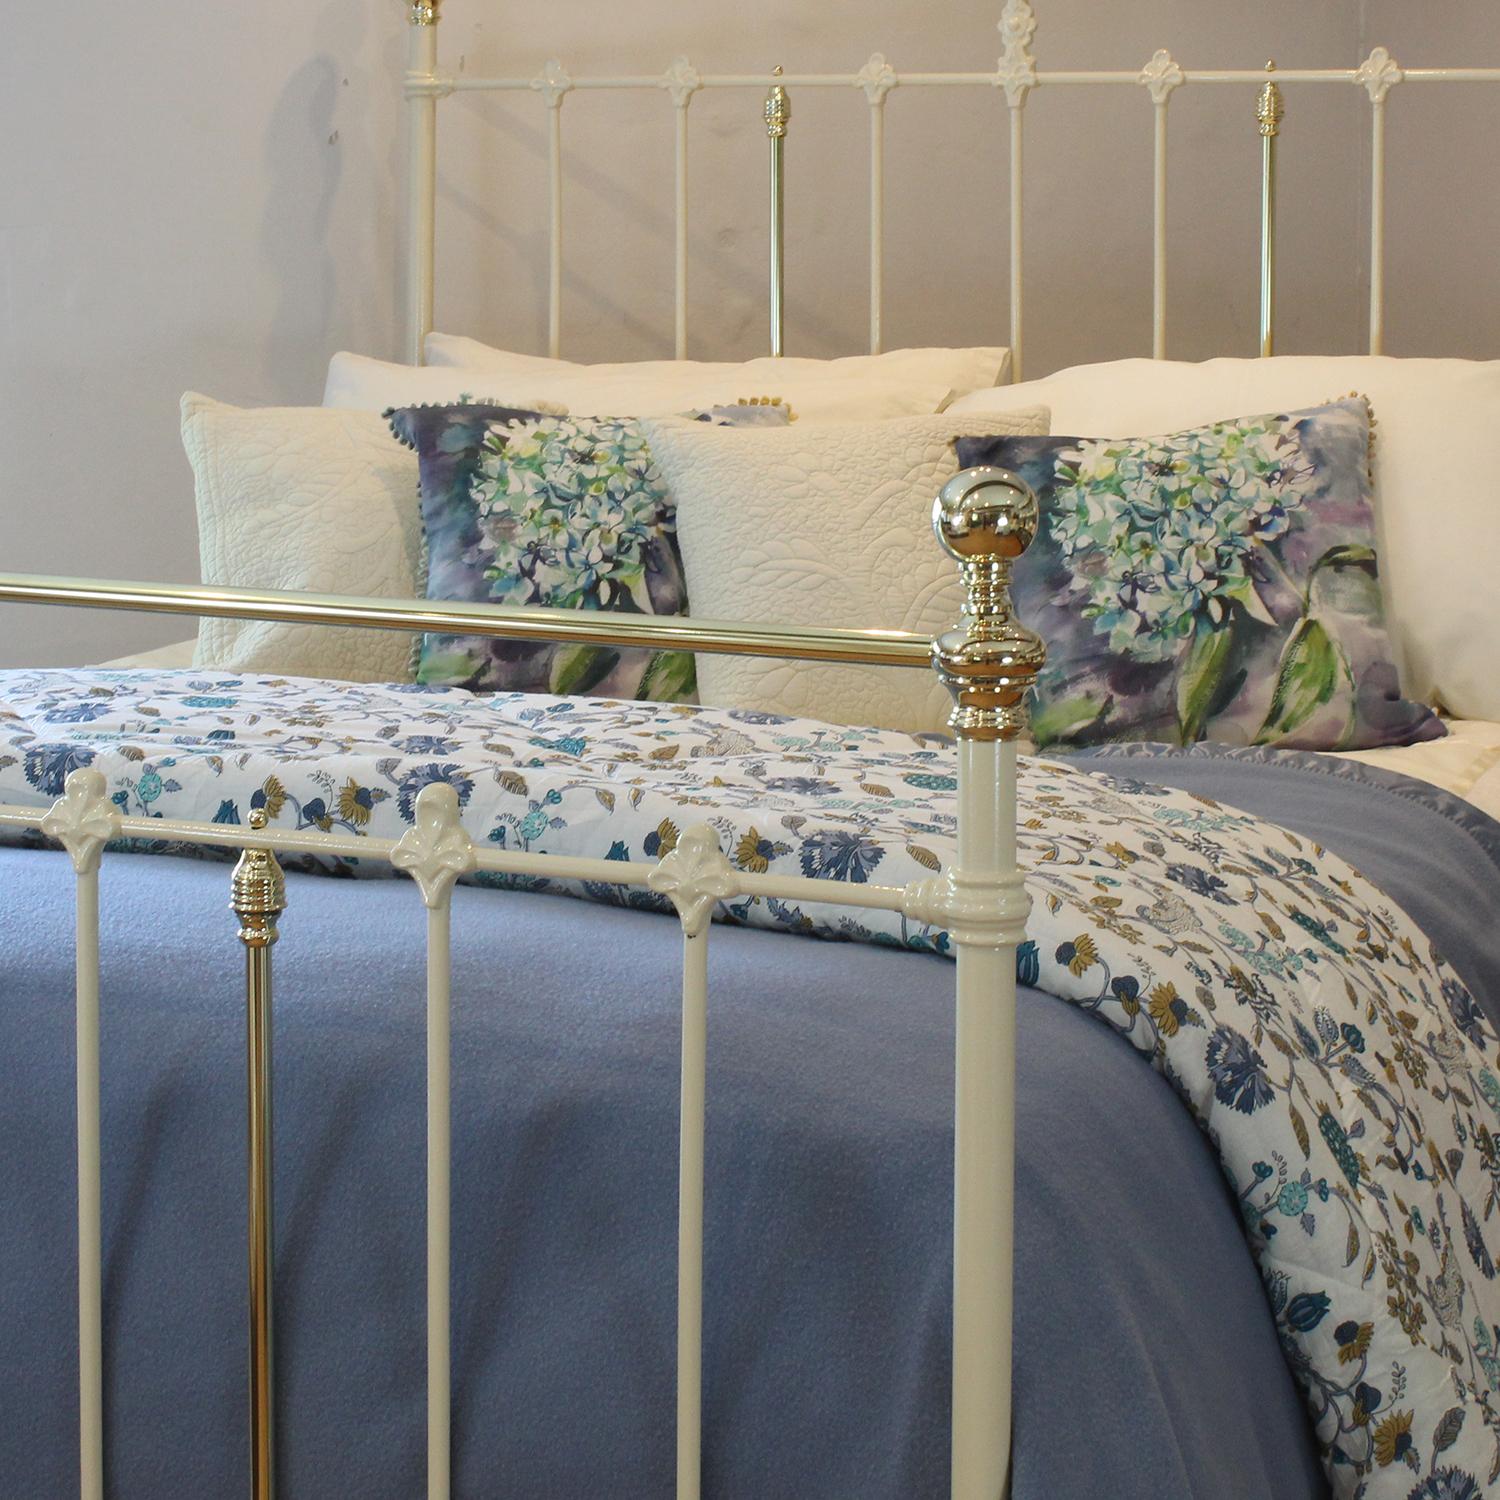 Cast Brass and Iron Antique Bed in Cream, MK256